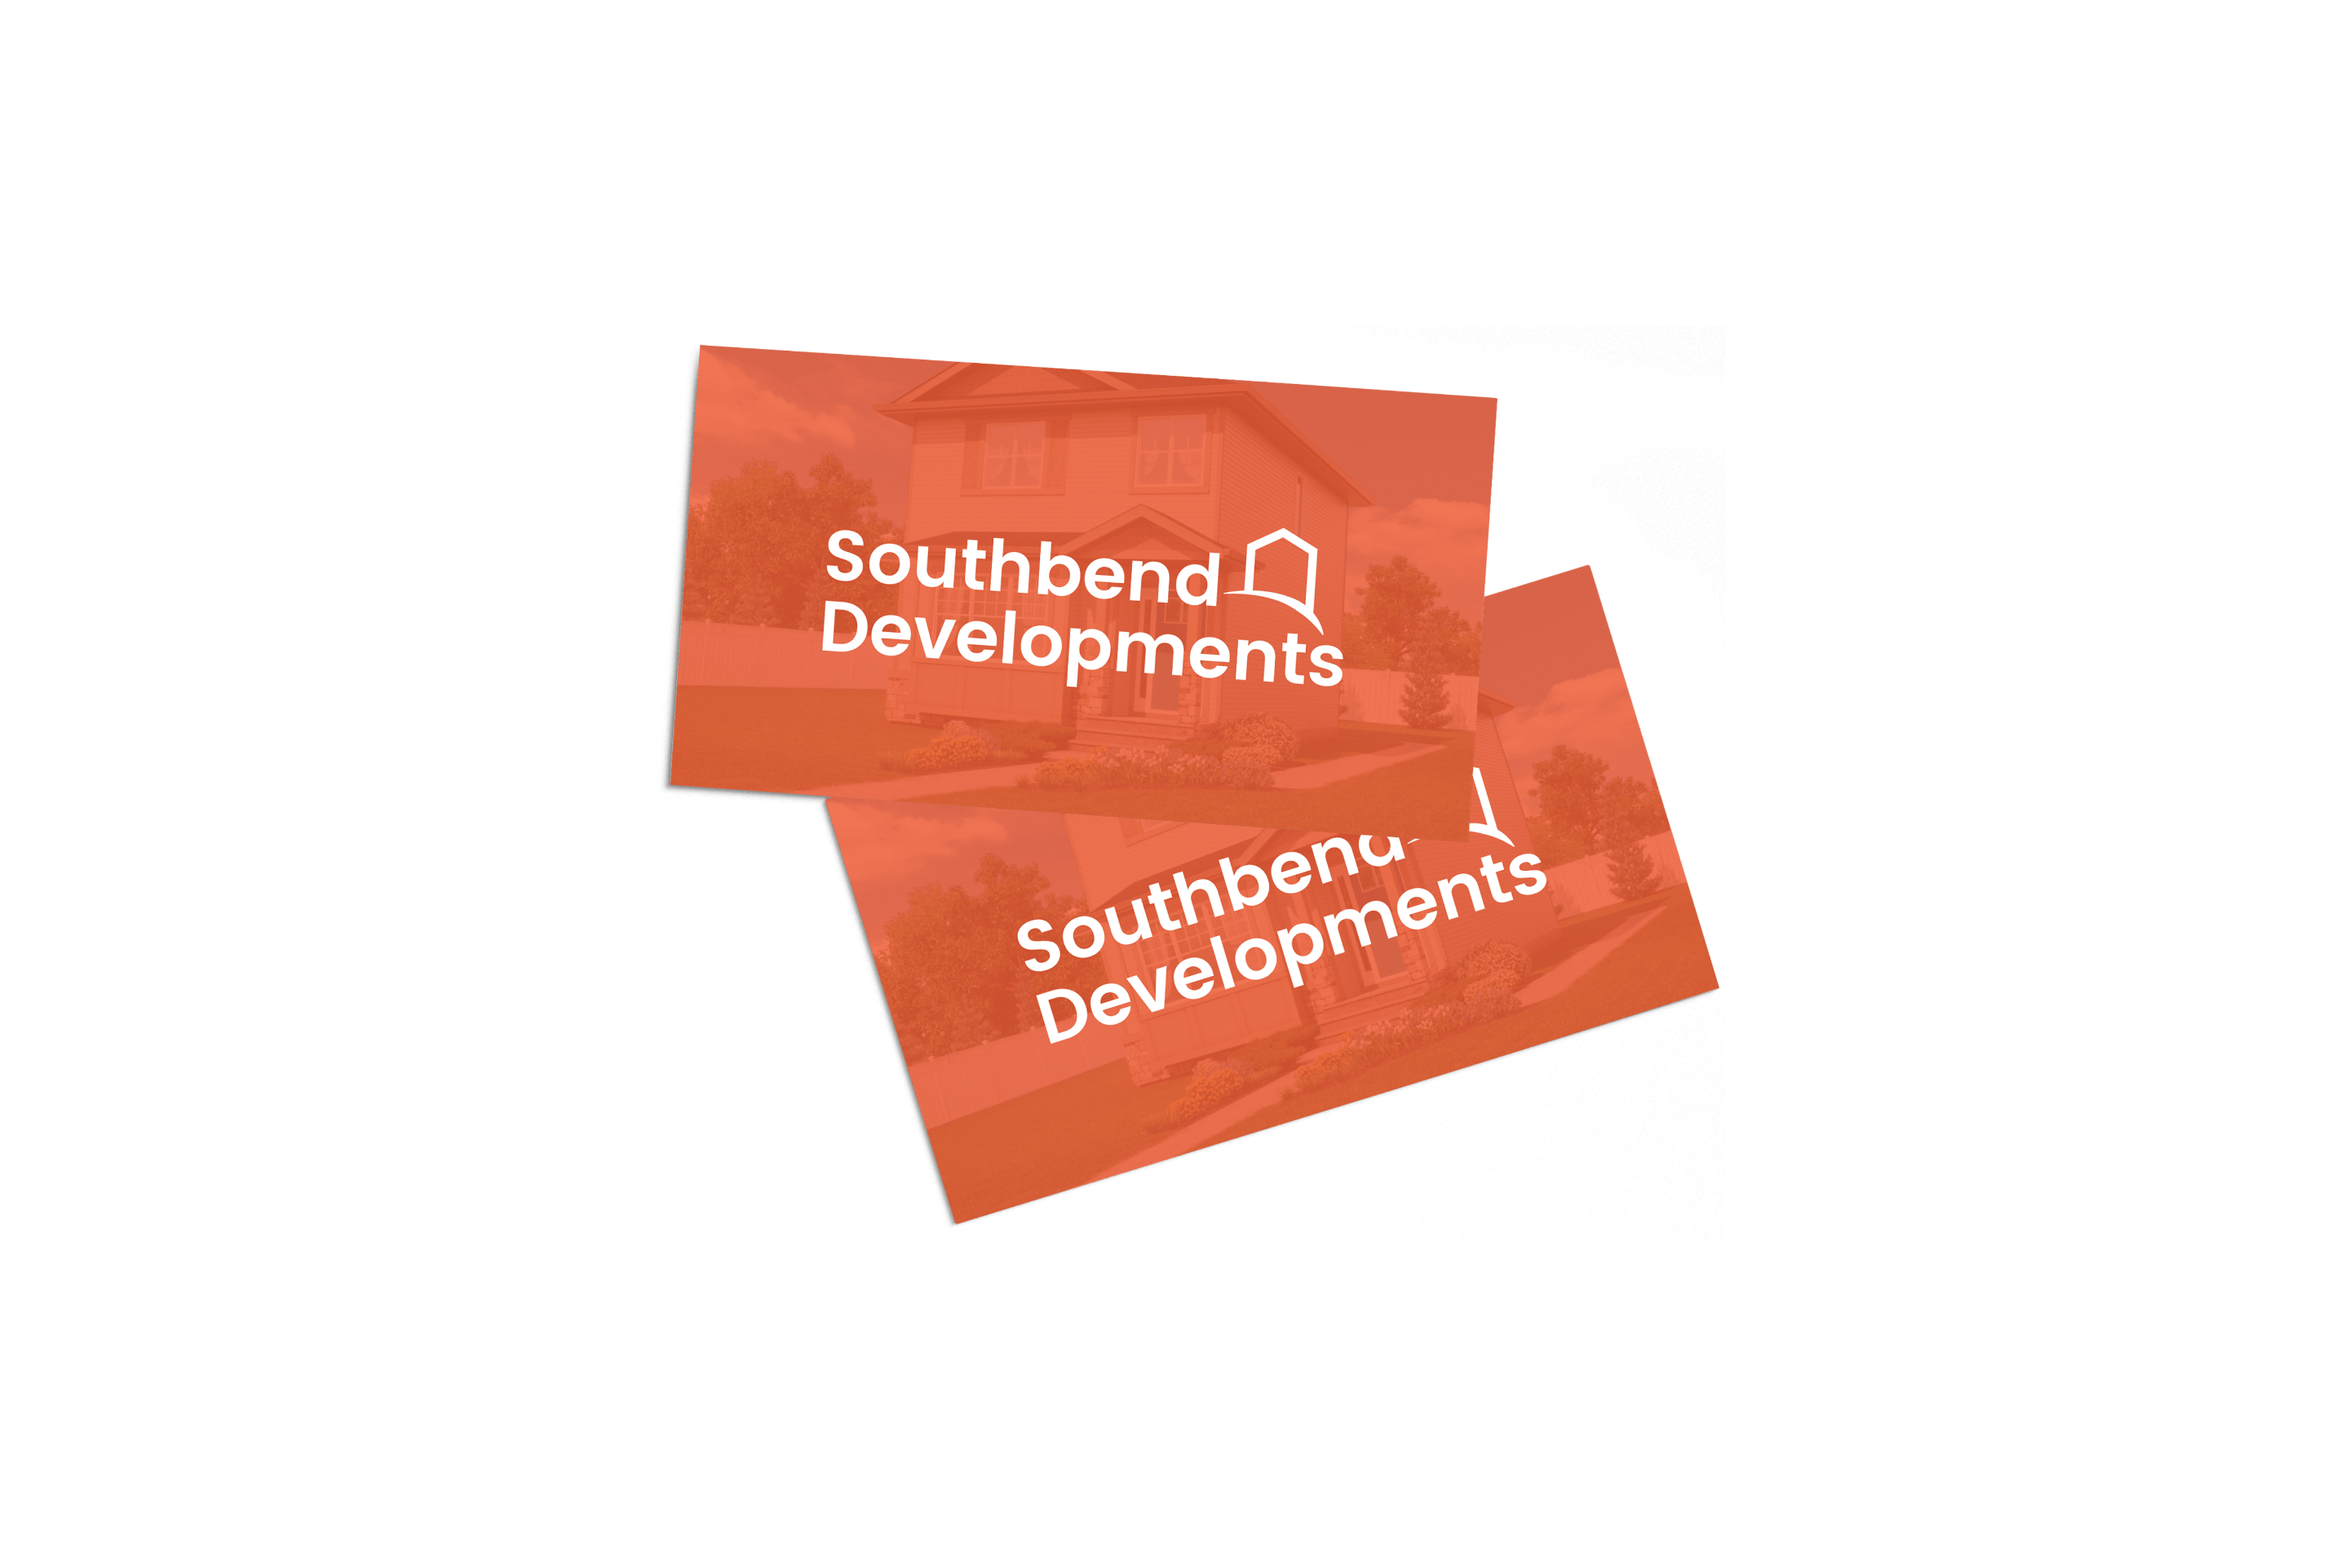 The new orange Southbend business card